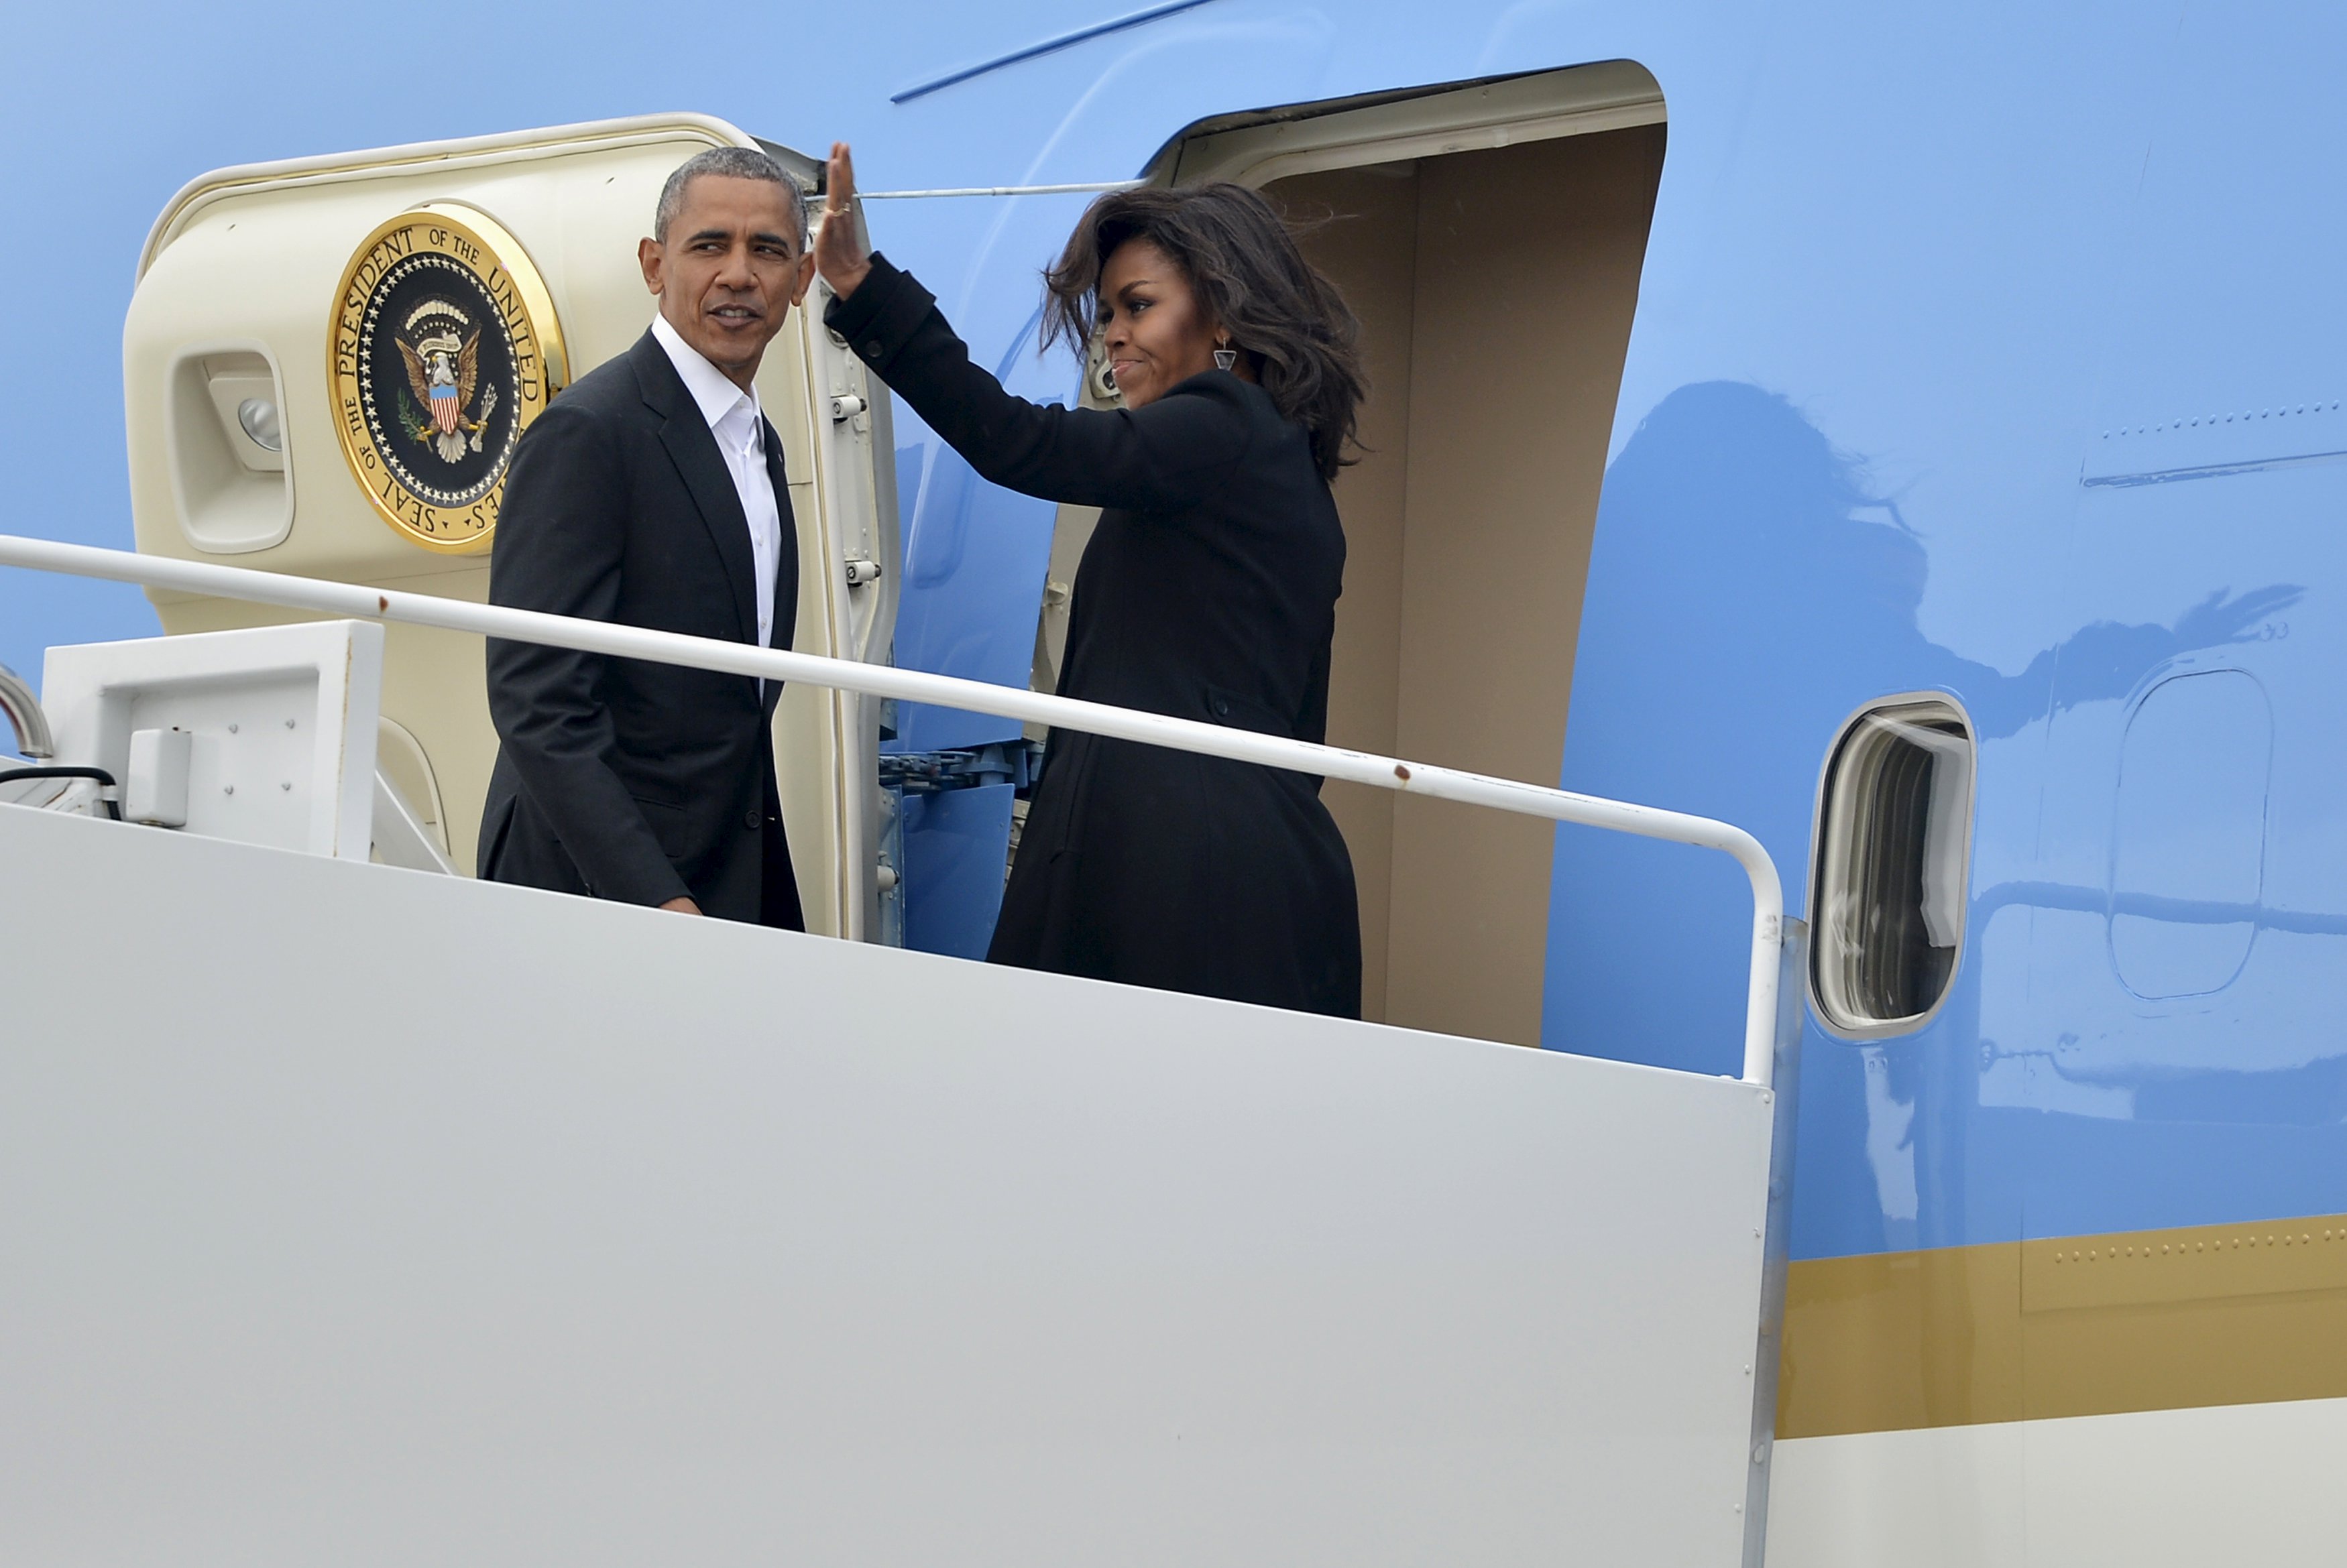 Obama heads for historic visit as Cuba rolls out red carpet